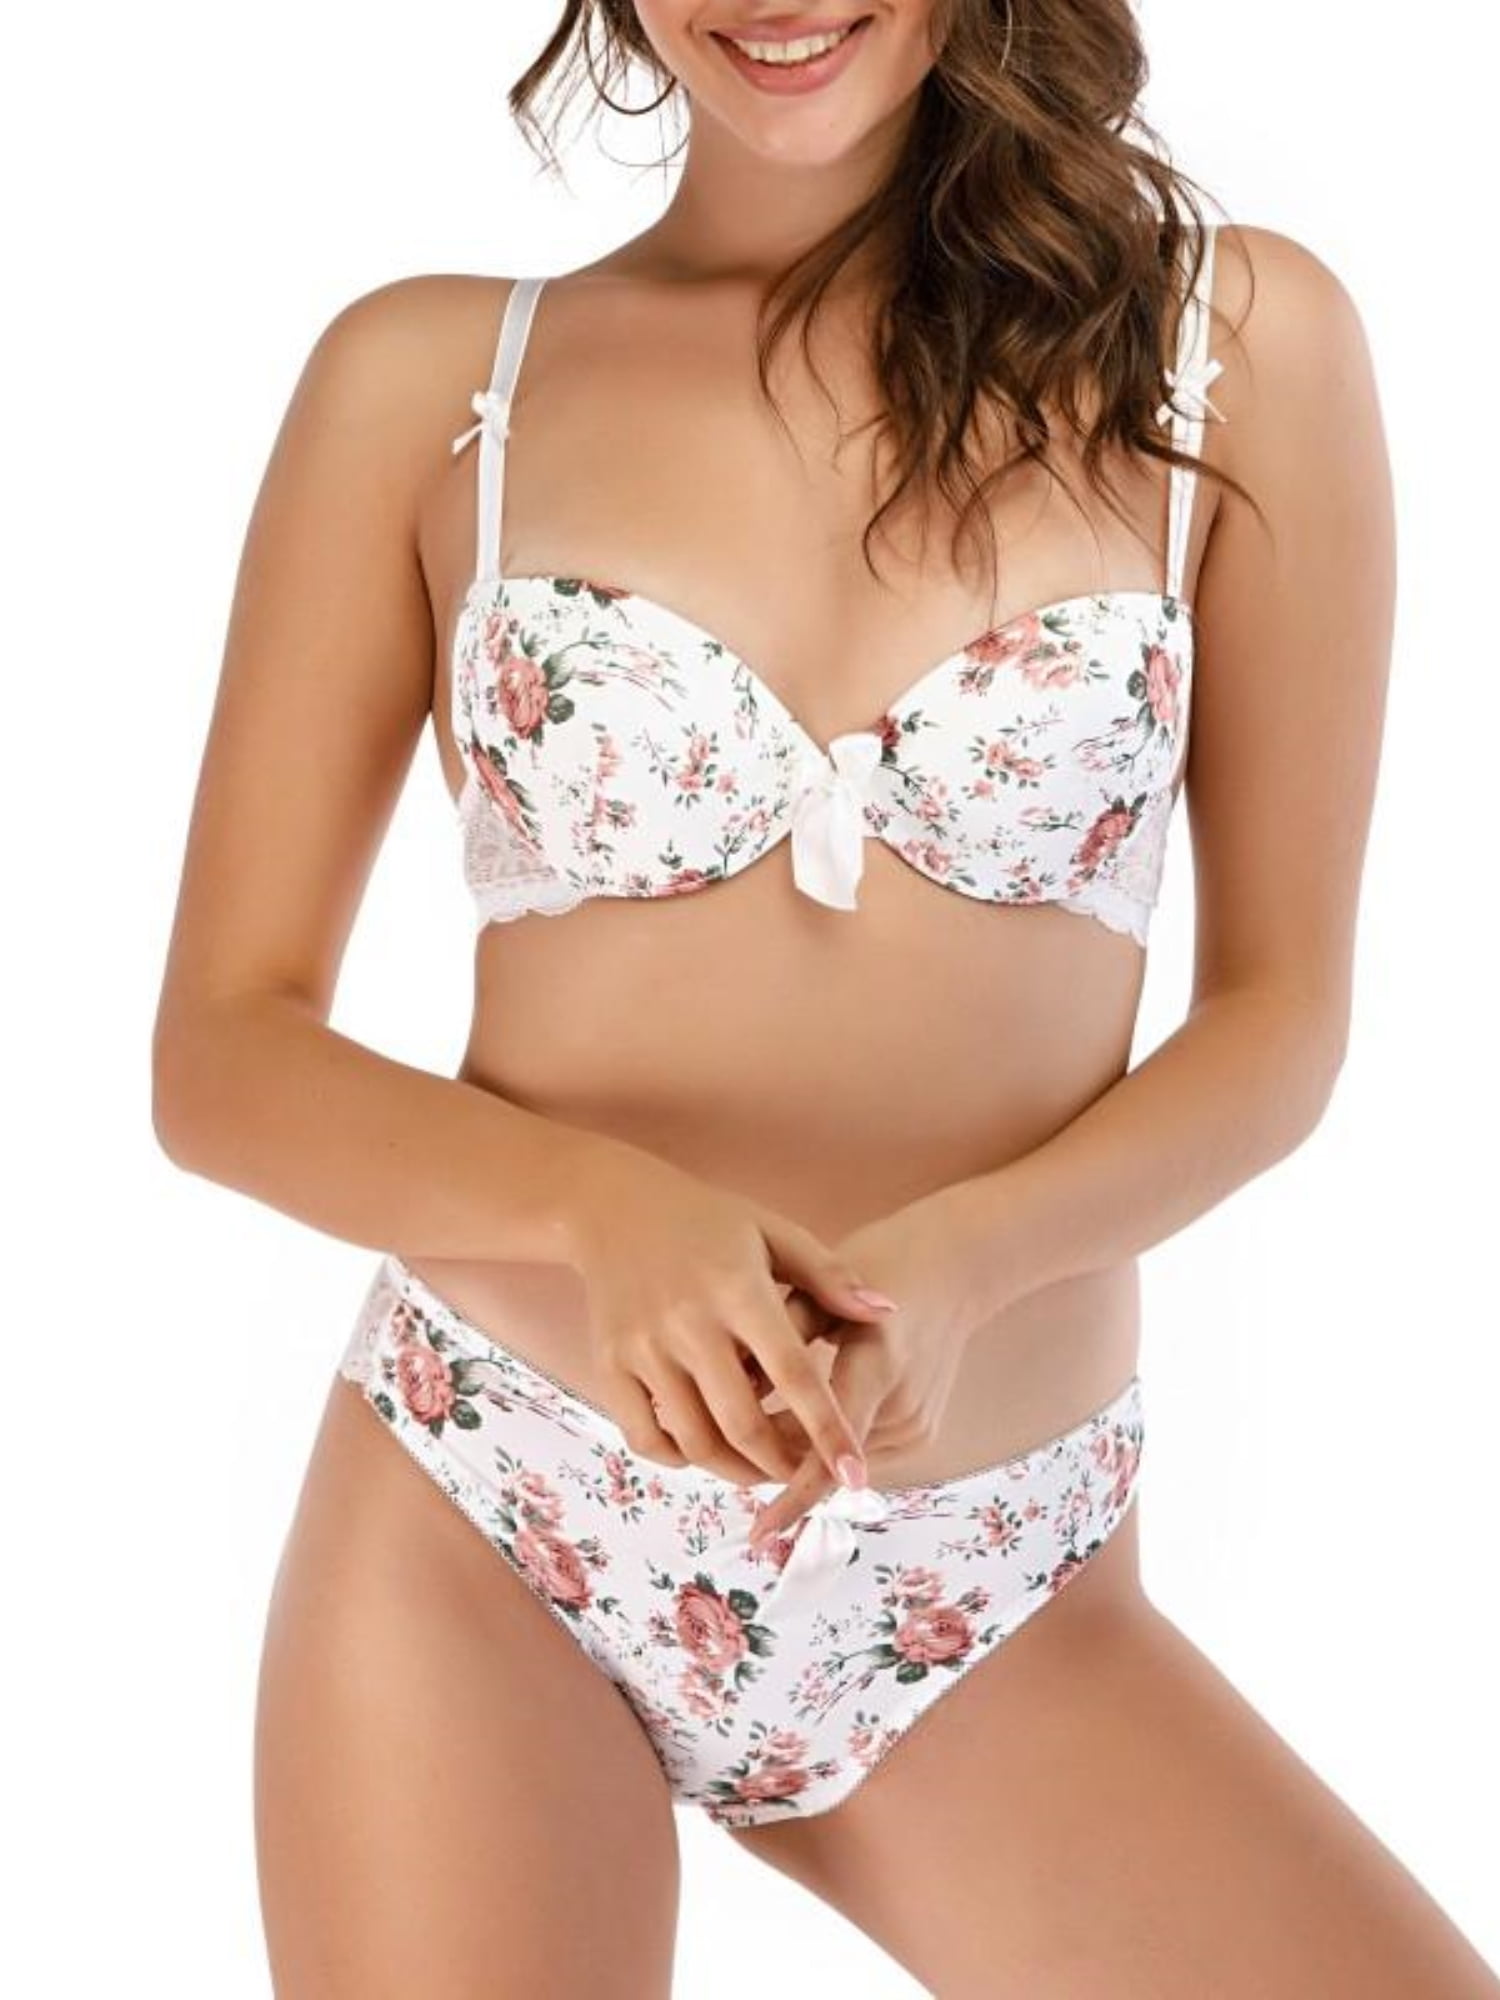 Heart Shaped Embroidered Bra And Brief Set Back For Women Sexy